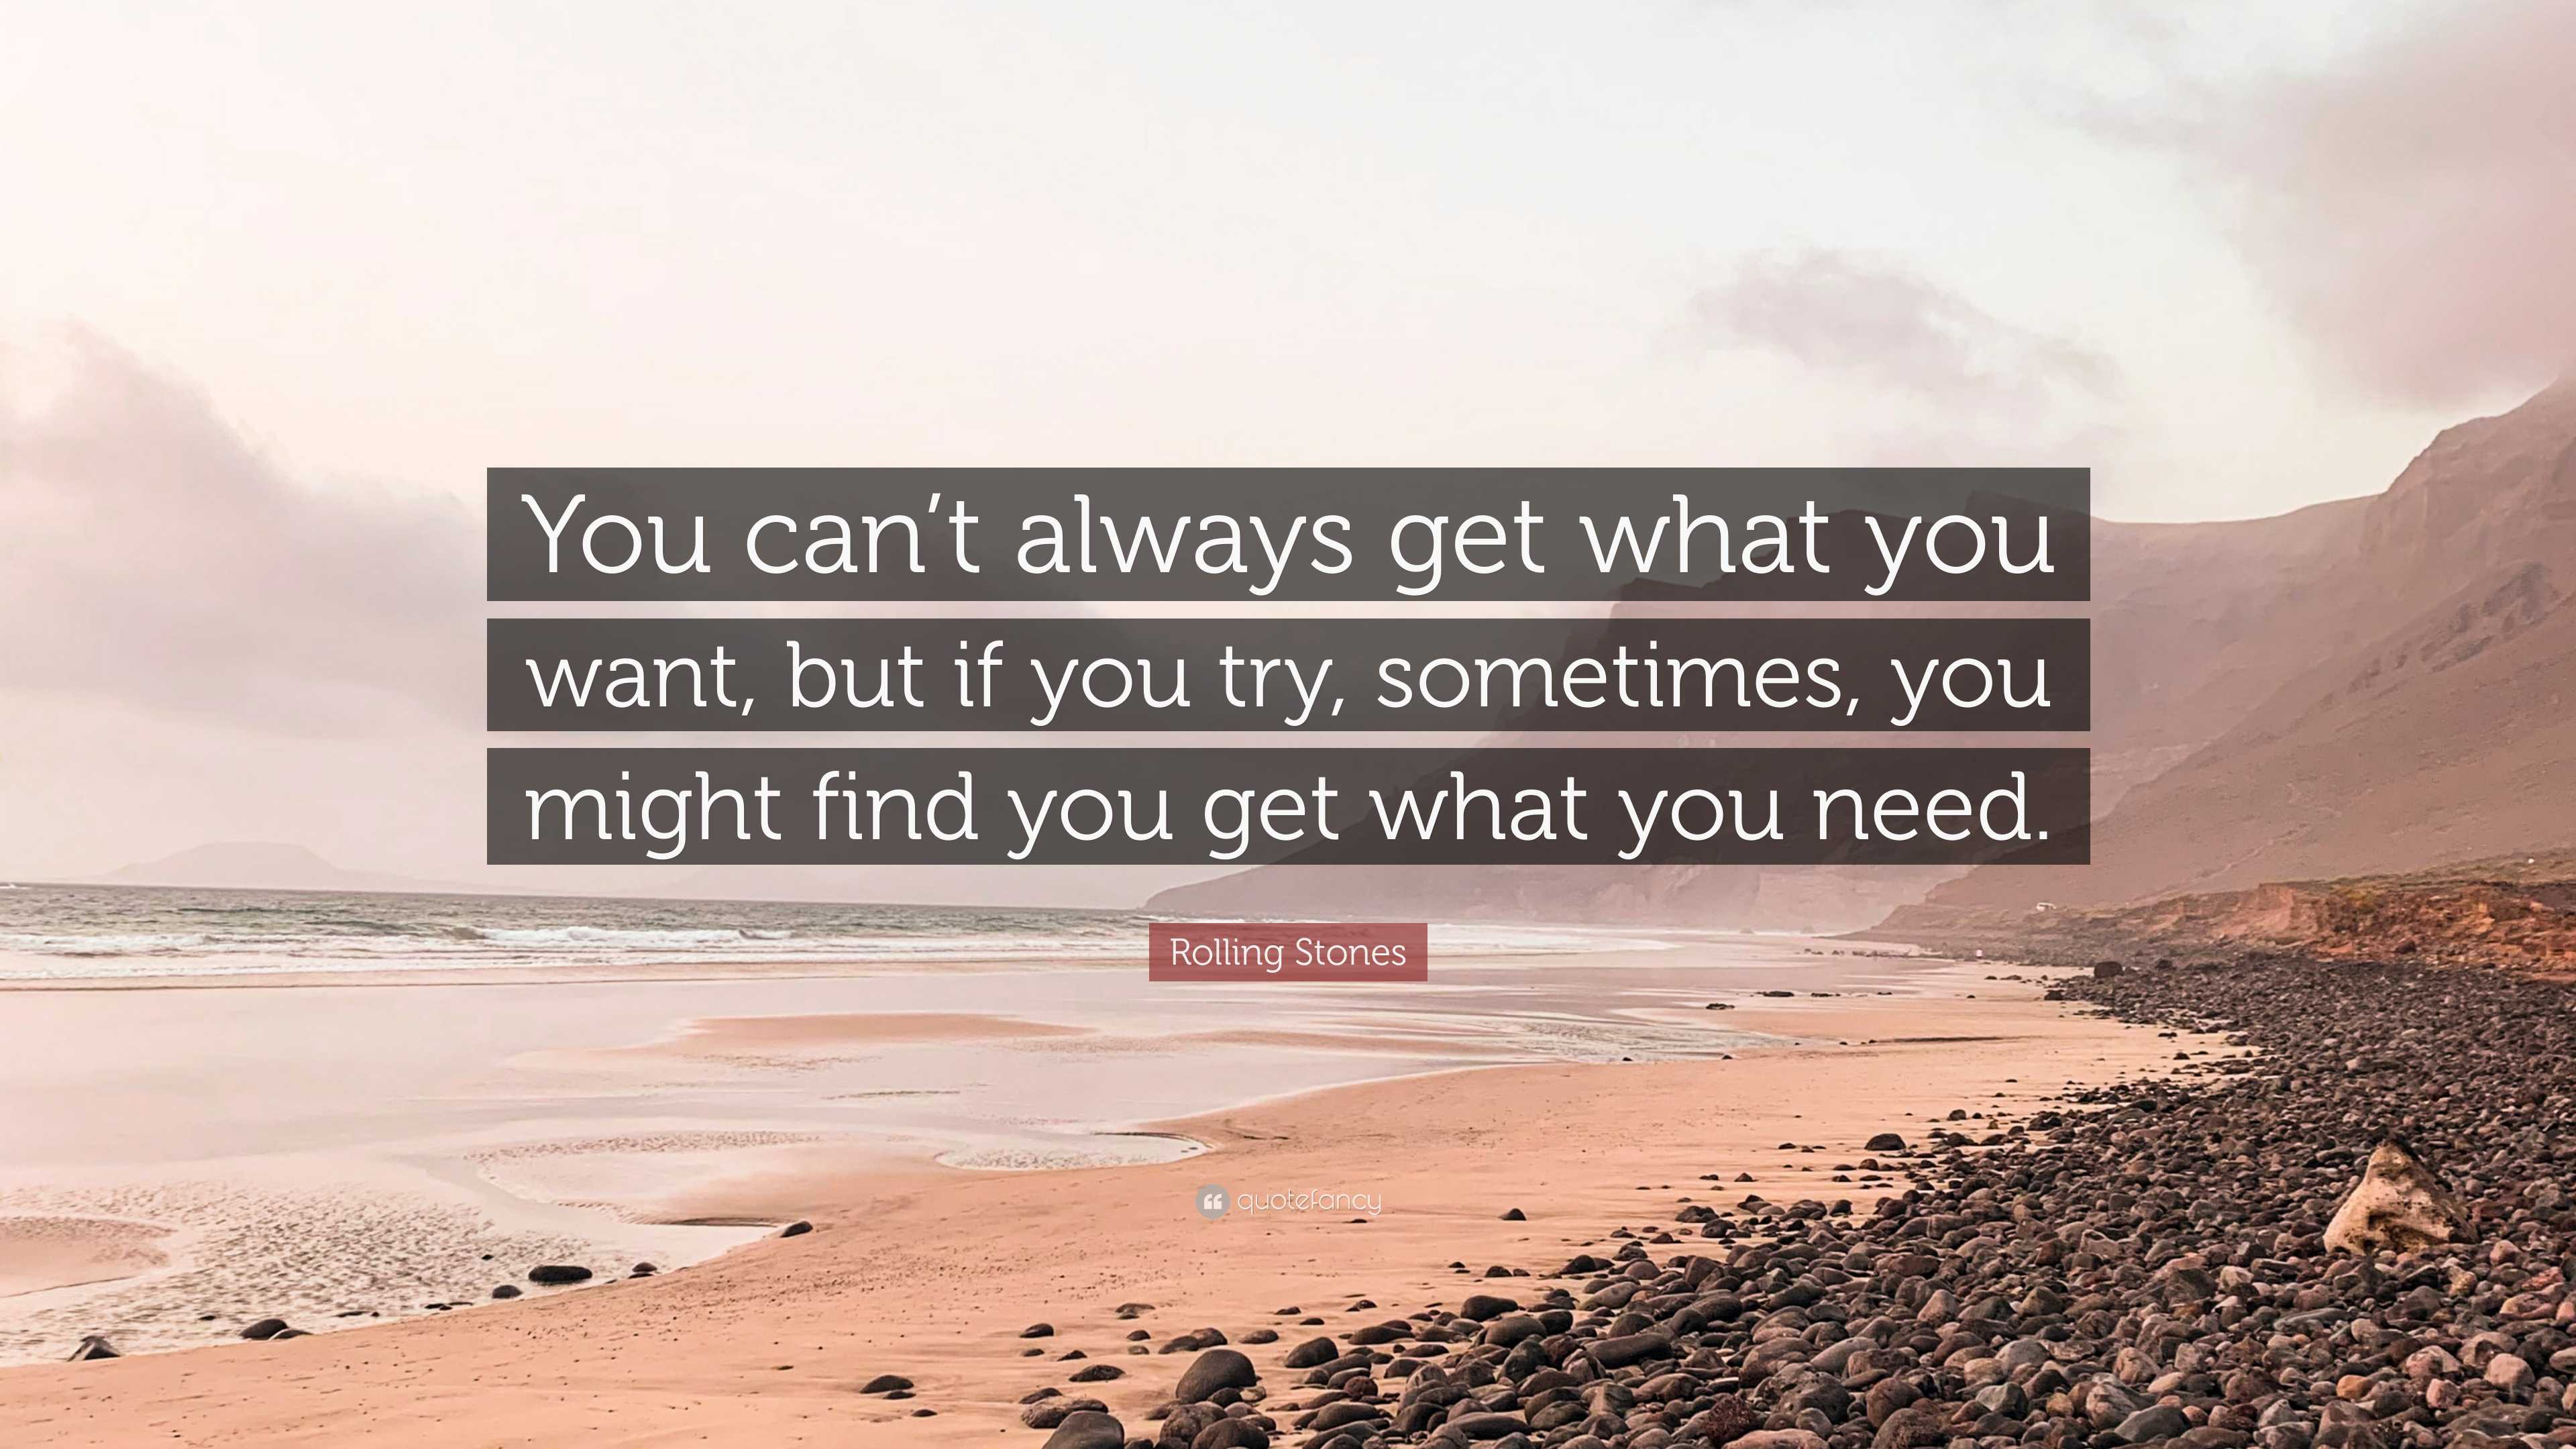 Rolling Stones Quote: “You can't always get what you want